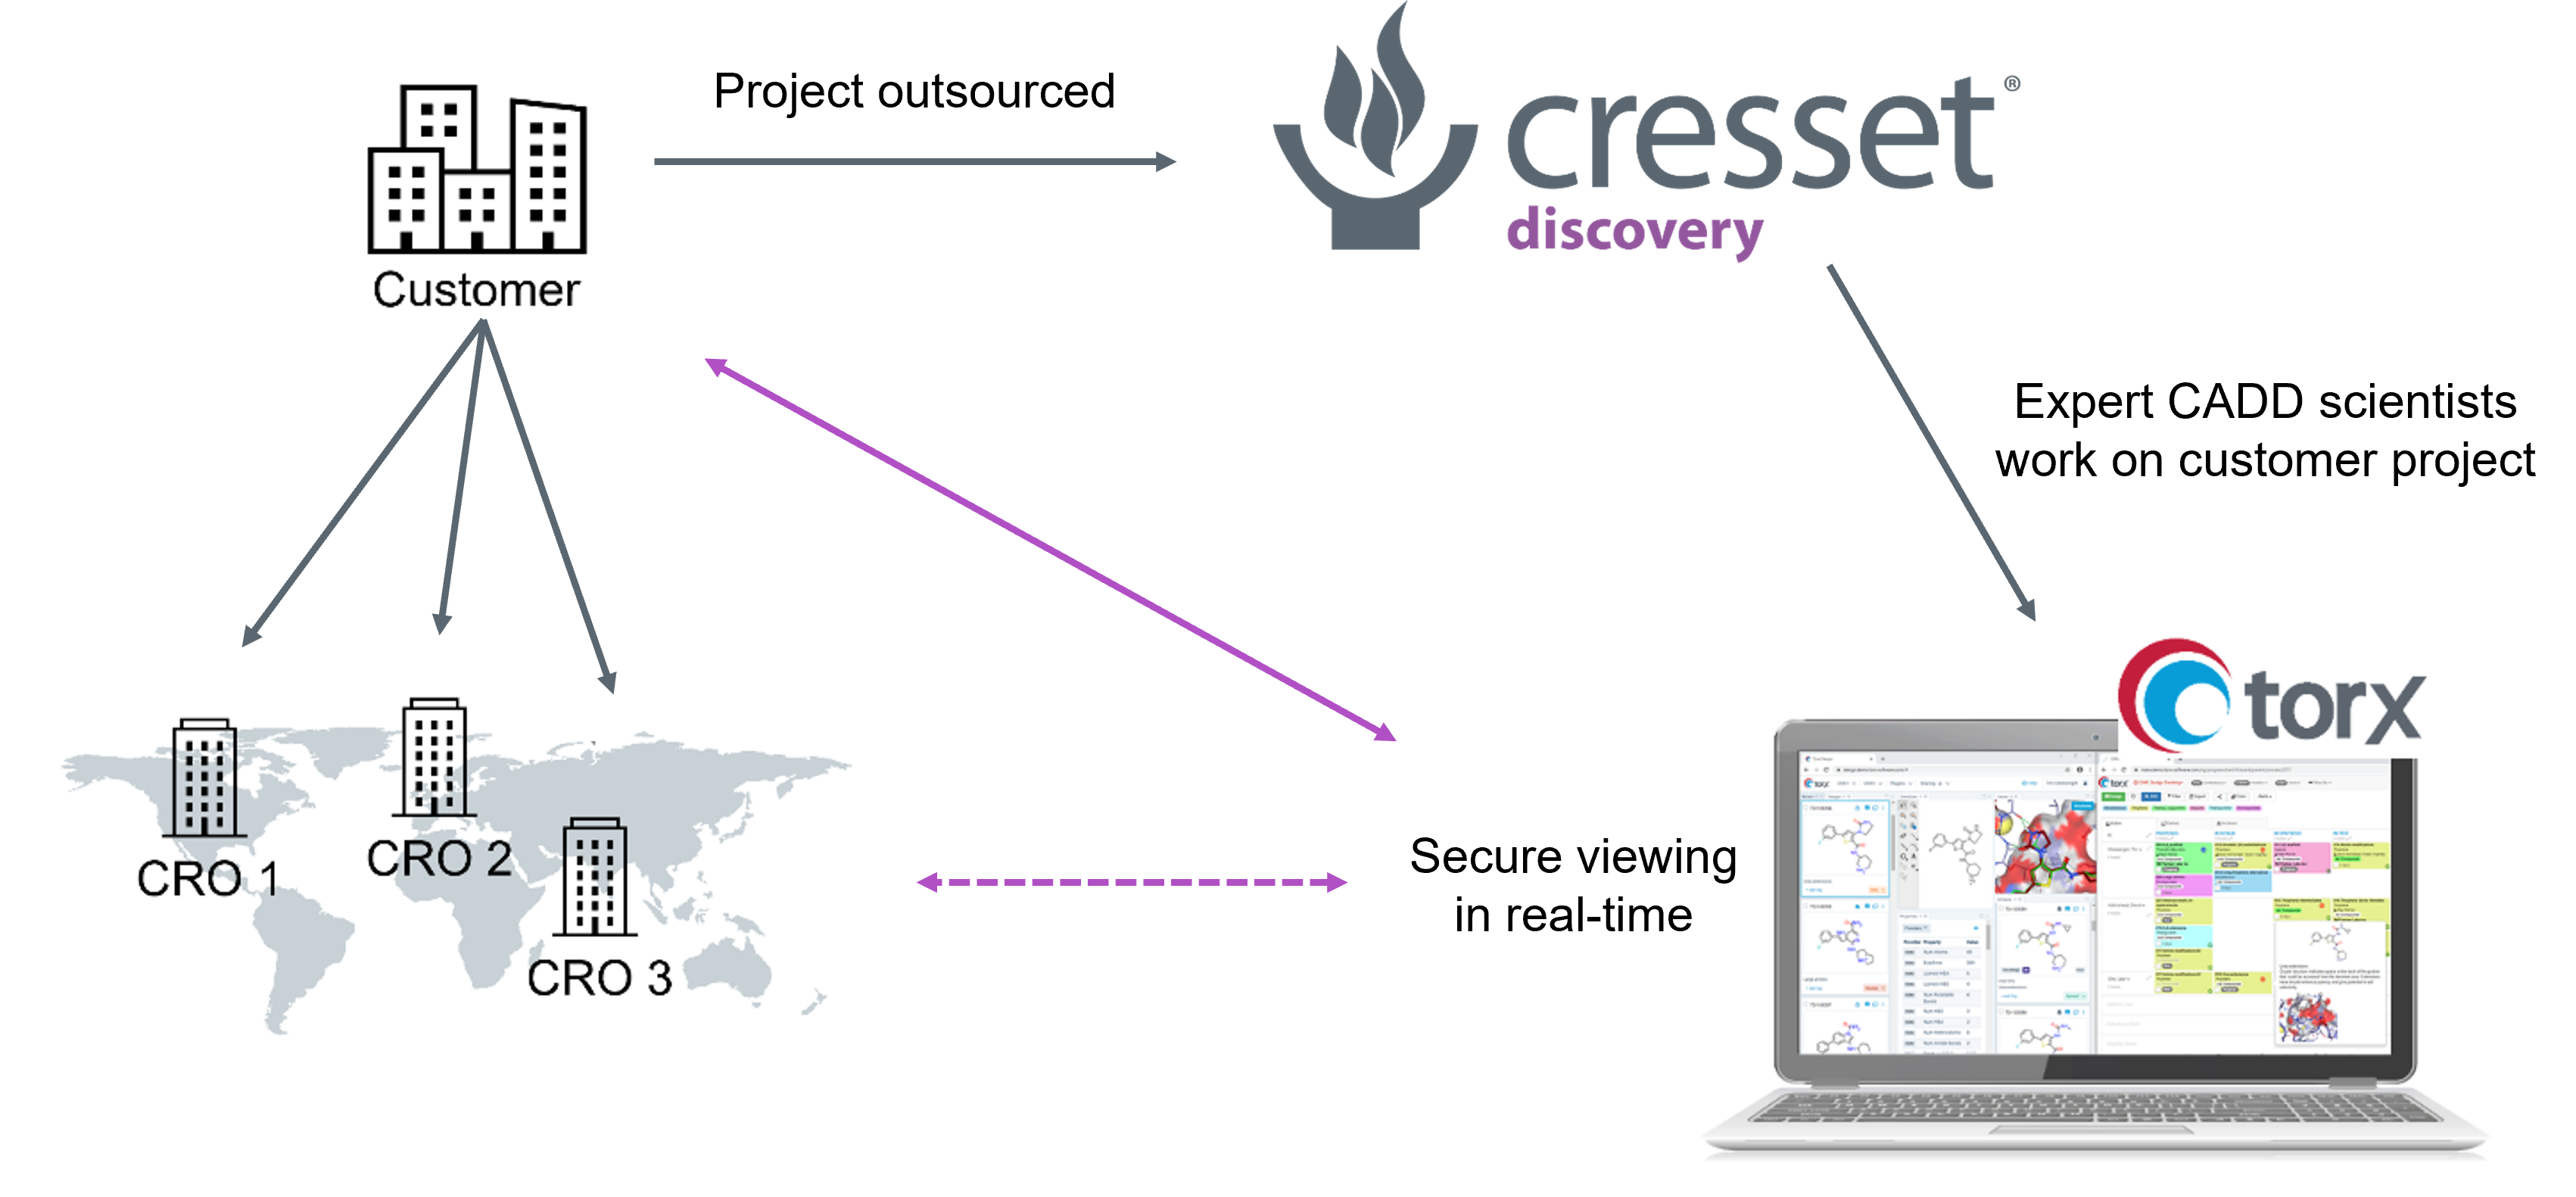 Working with Cresset Discovery and Torx